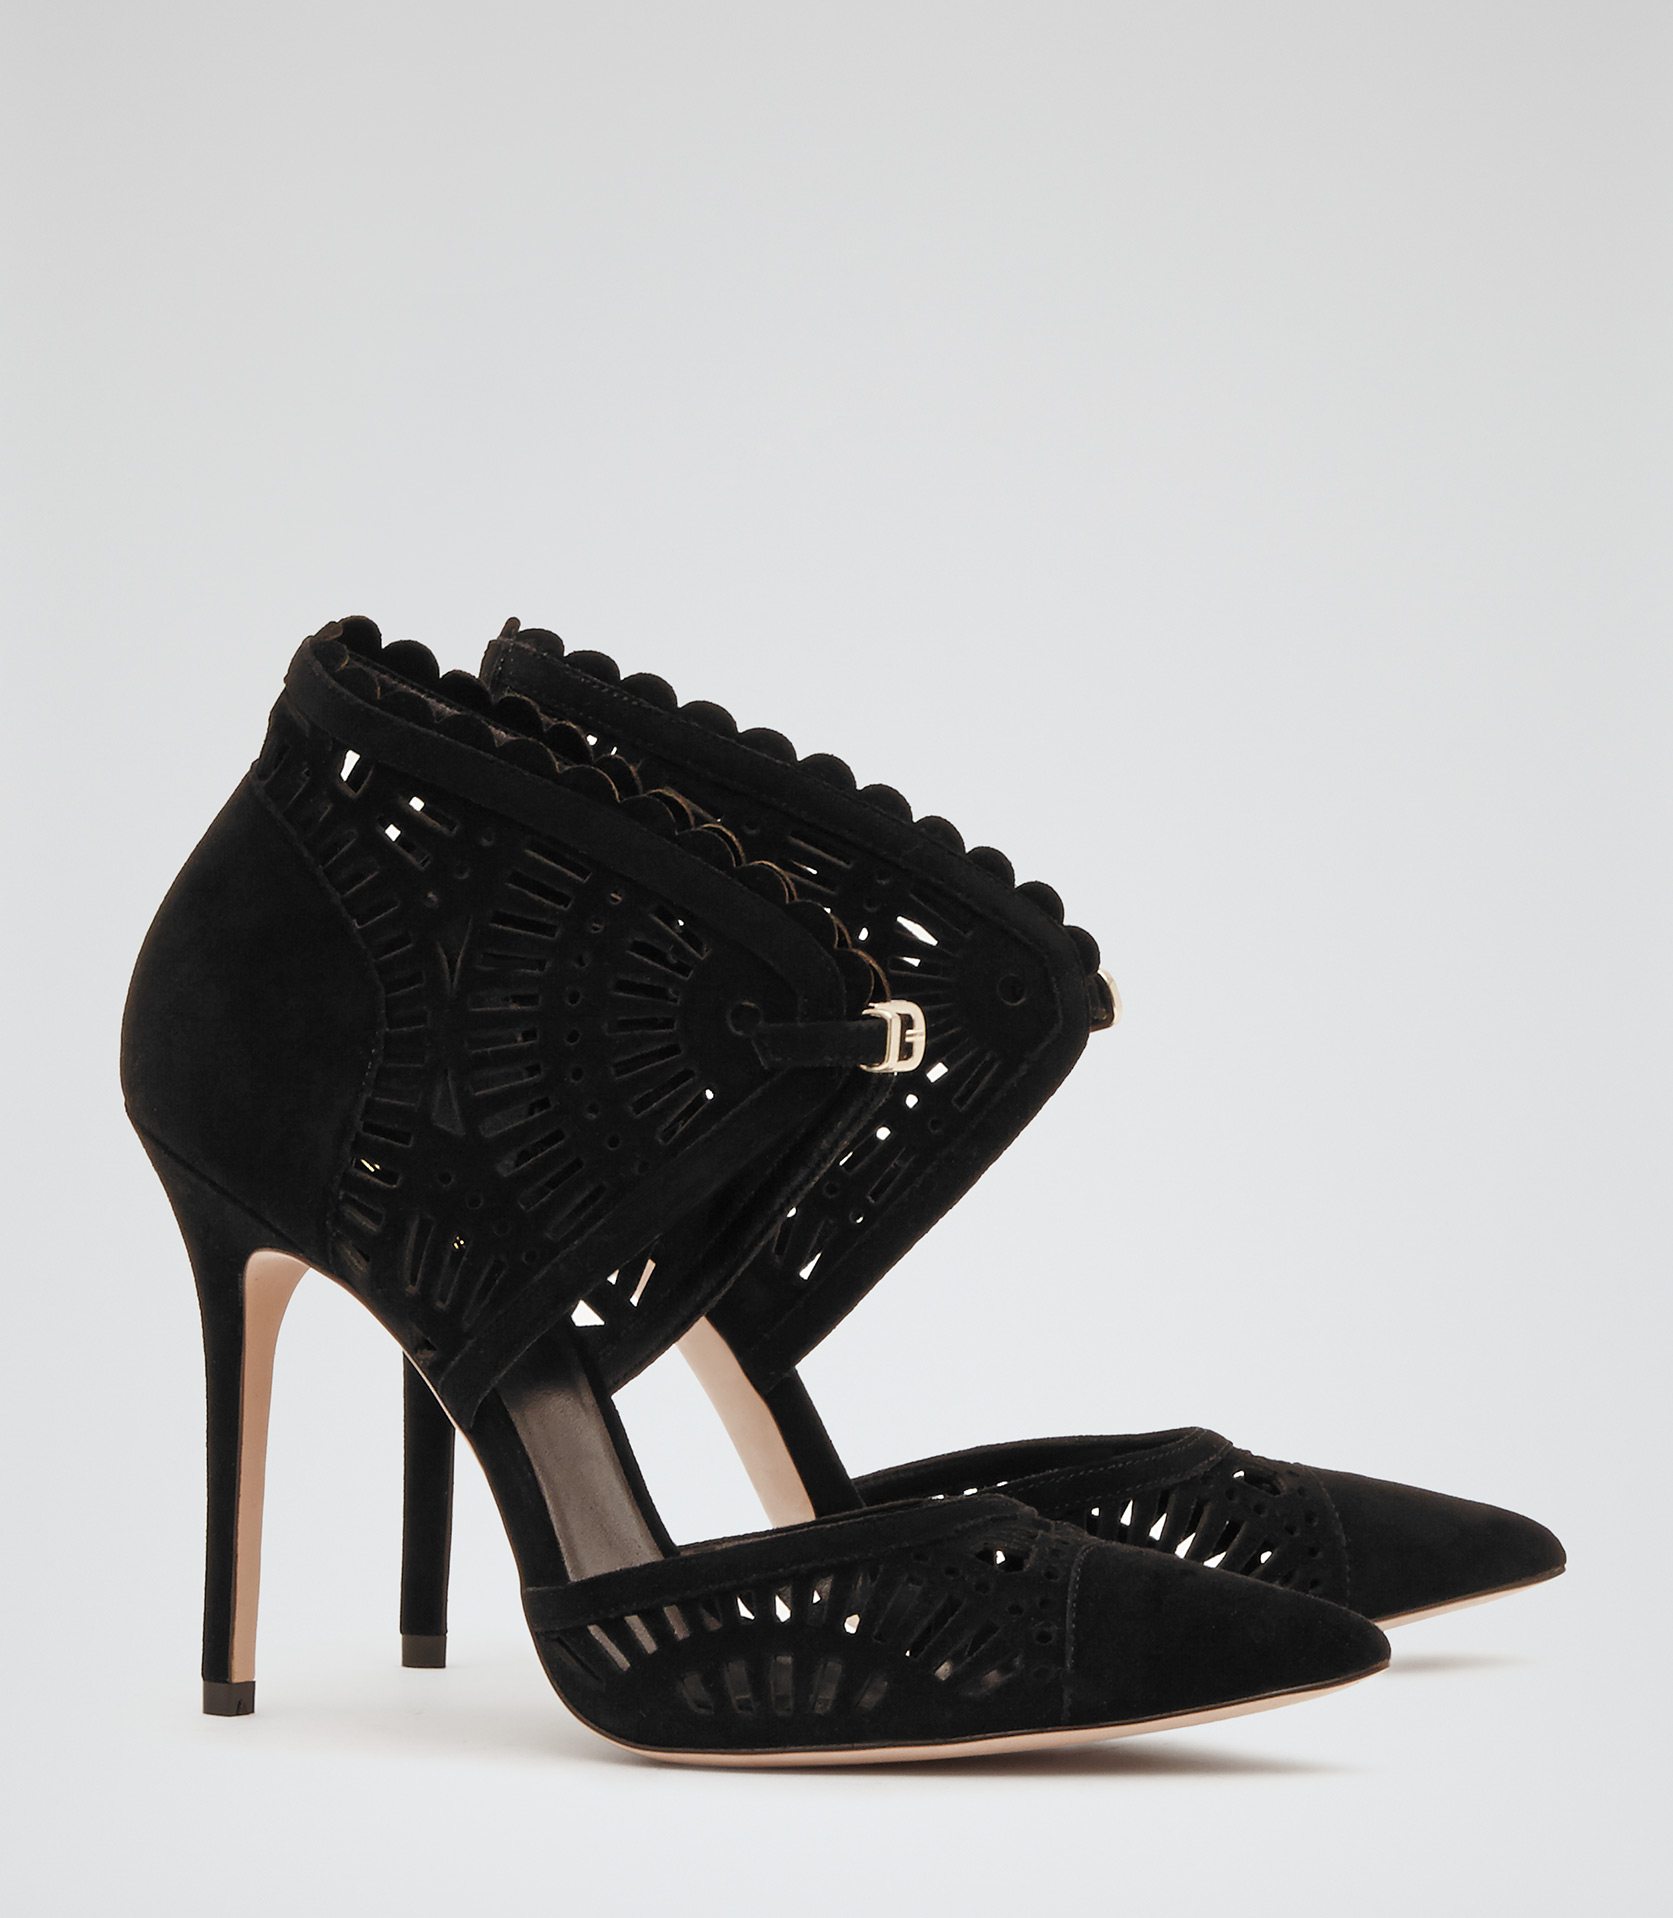 reiss-black-lupin-laser-cut-court-shoes-product-1-22421232-2-690635820-normal.jpg